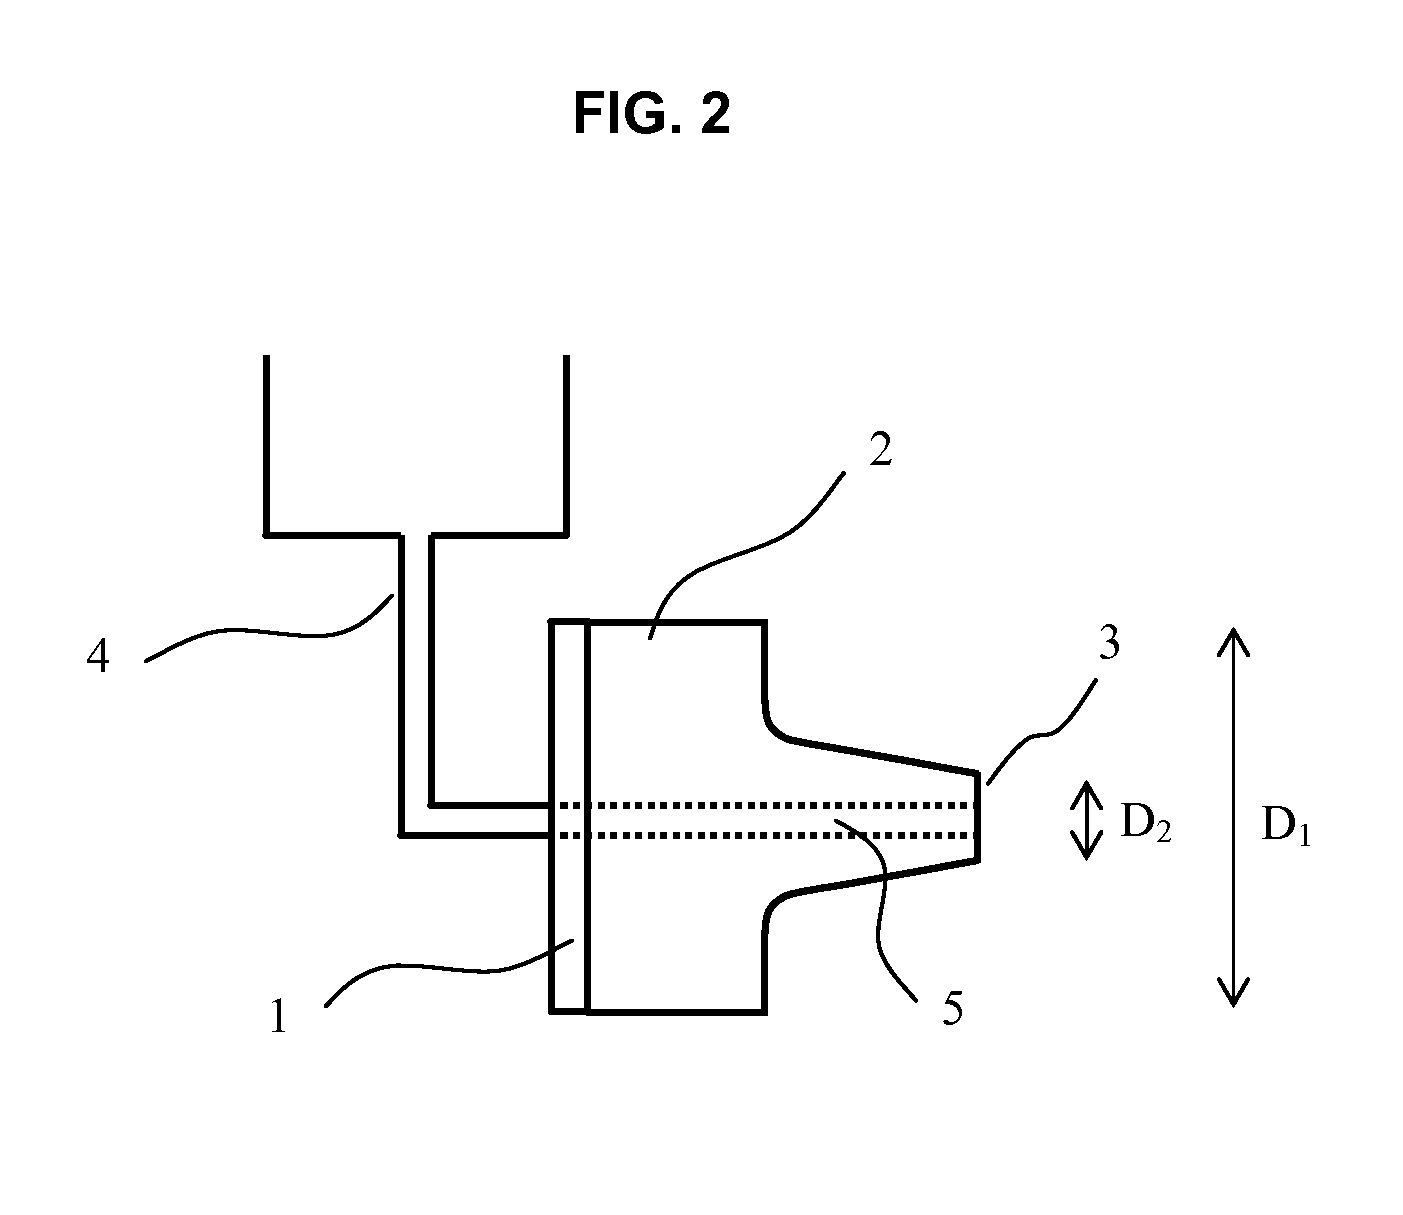 Liquid dispensing apparatus based on piezoelectrically driven hollow horn